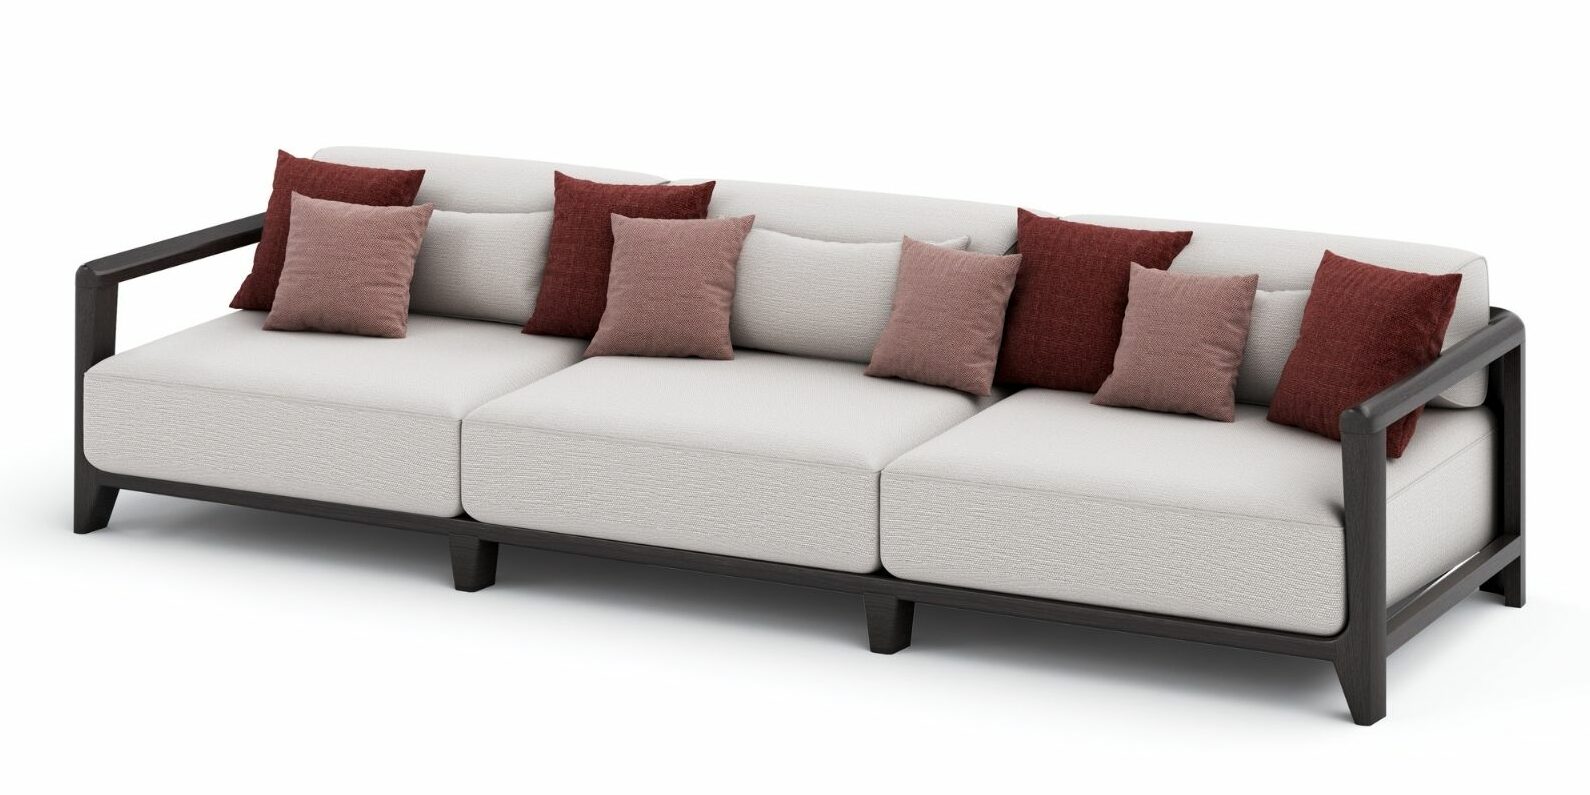 Largo Sofa Square – Upholstered Back in Outdoor Sofas for Largo collection